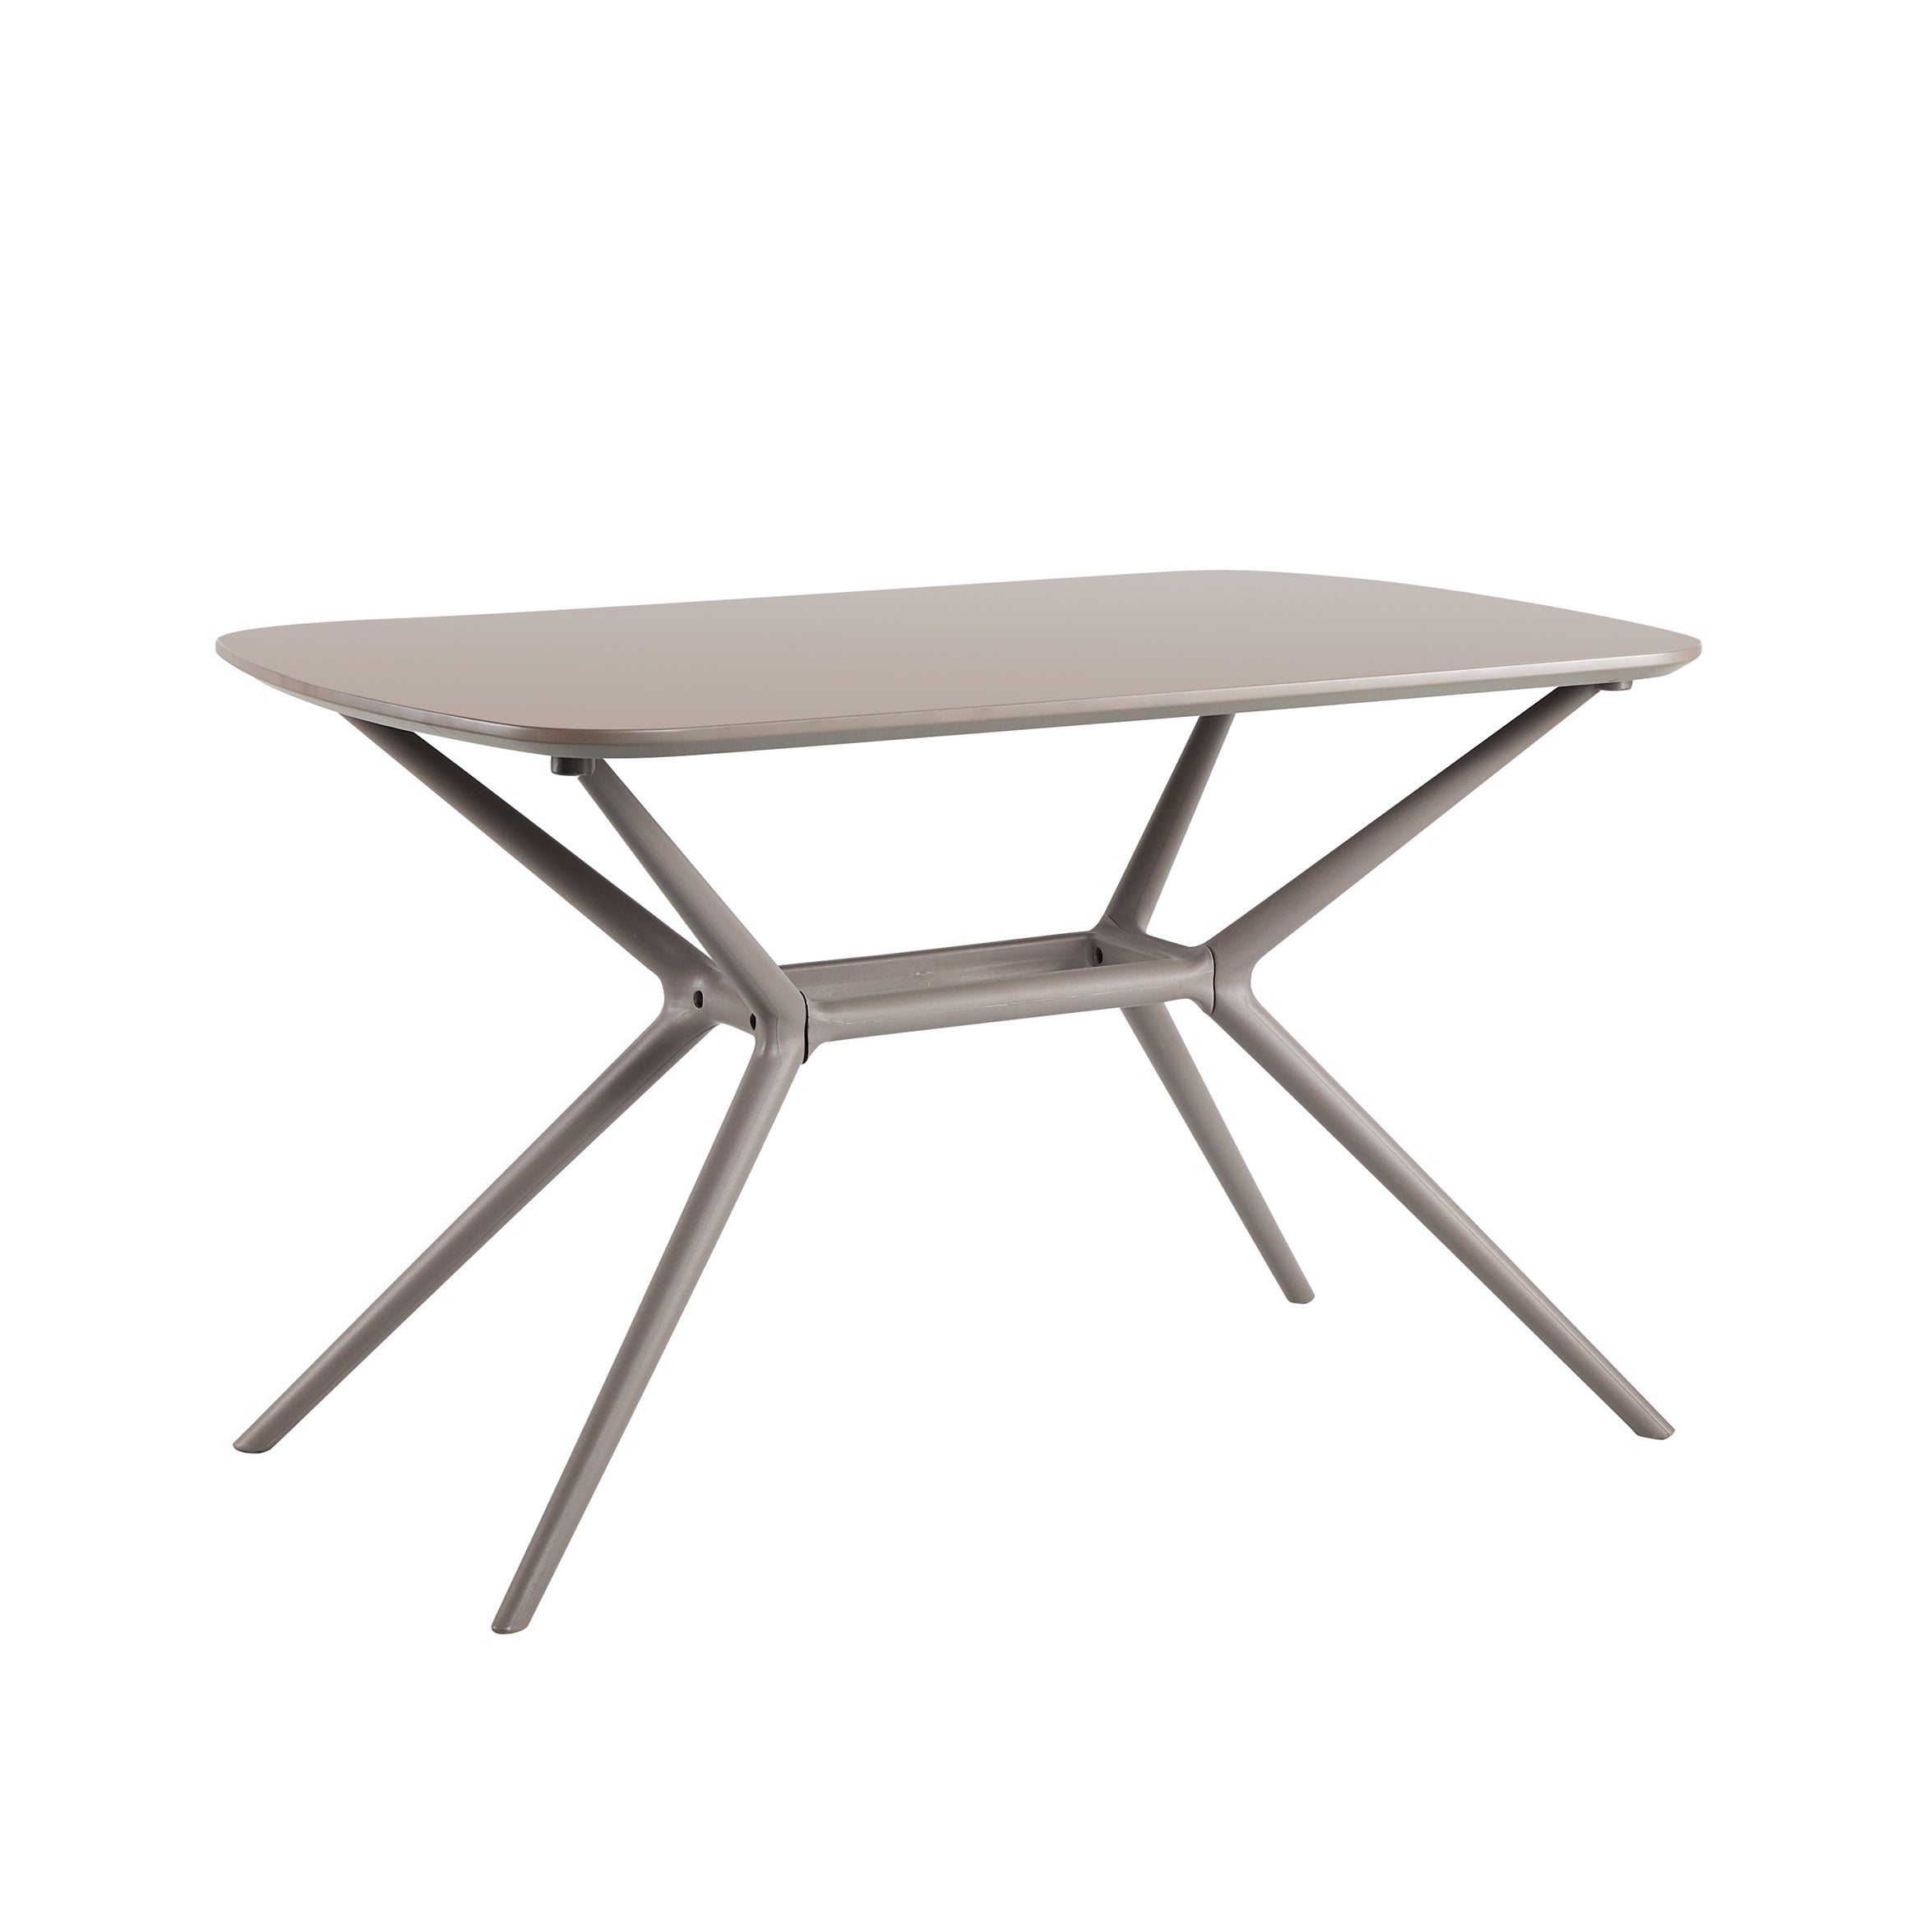 Dande Dining Table - Taupe